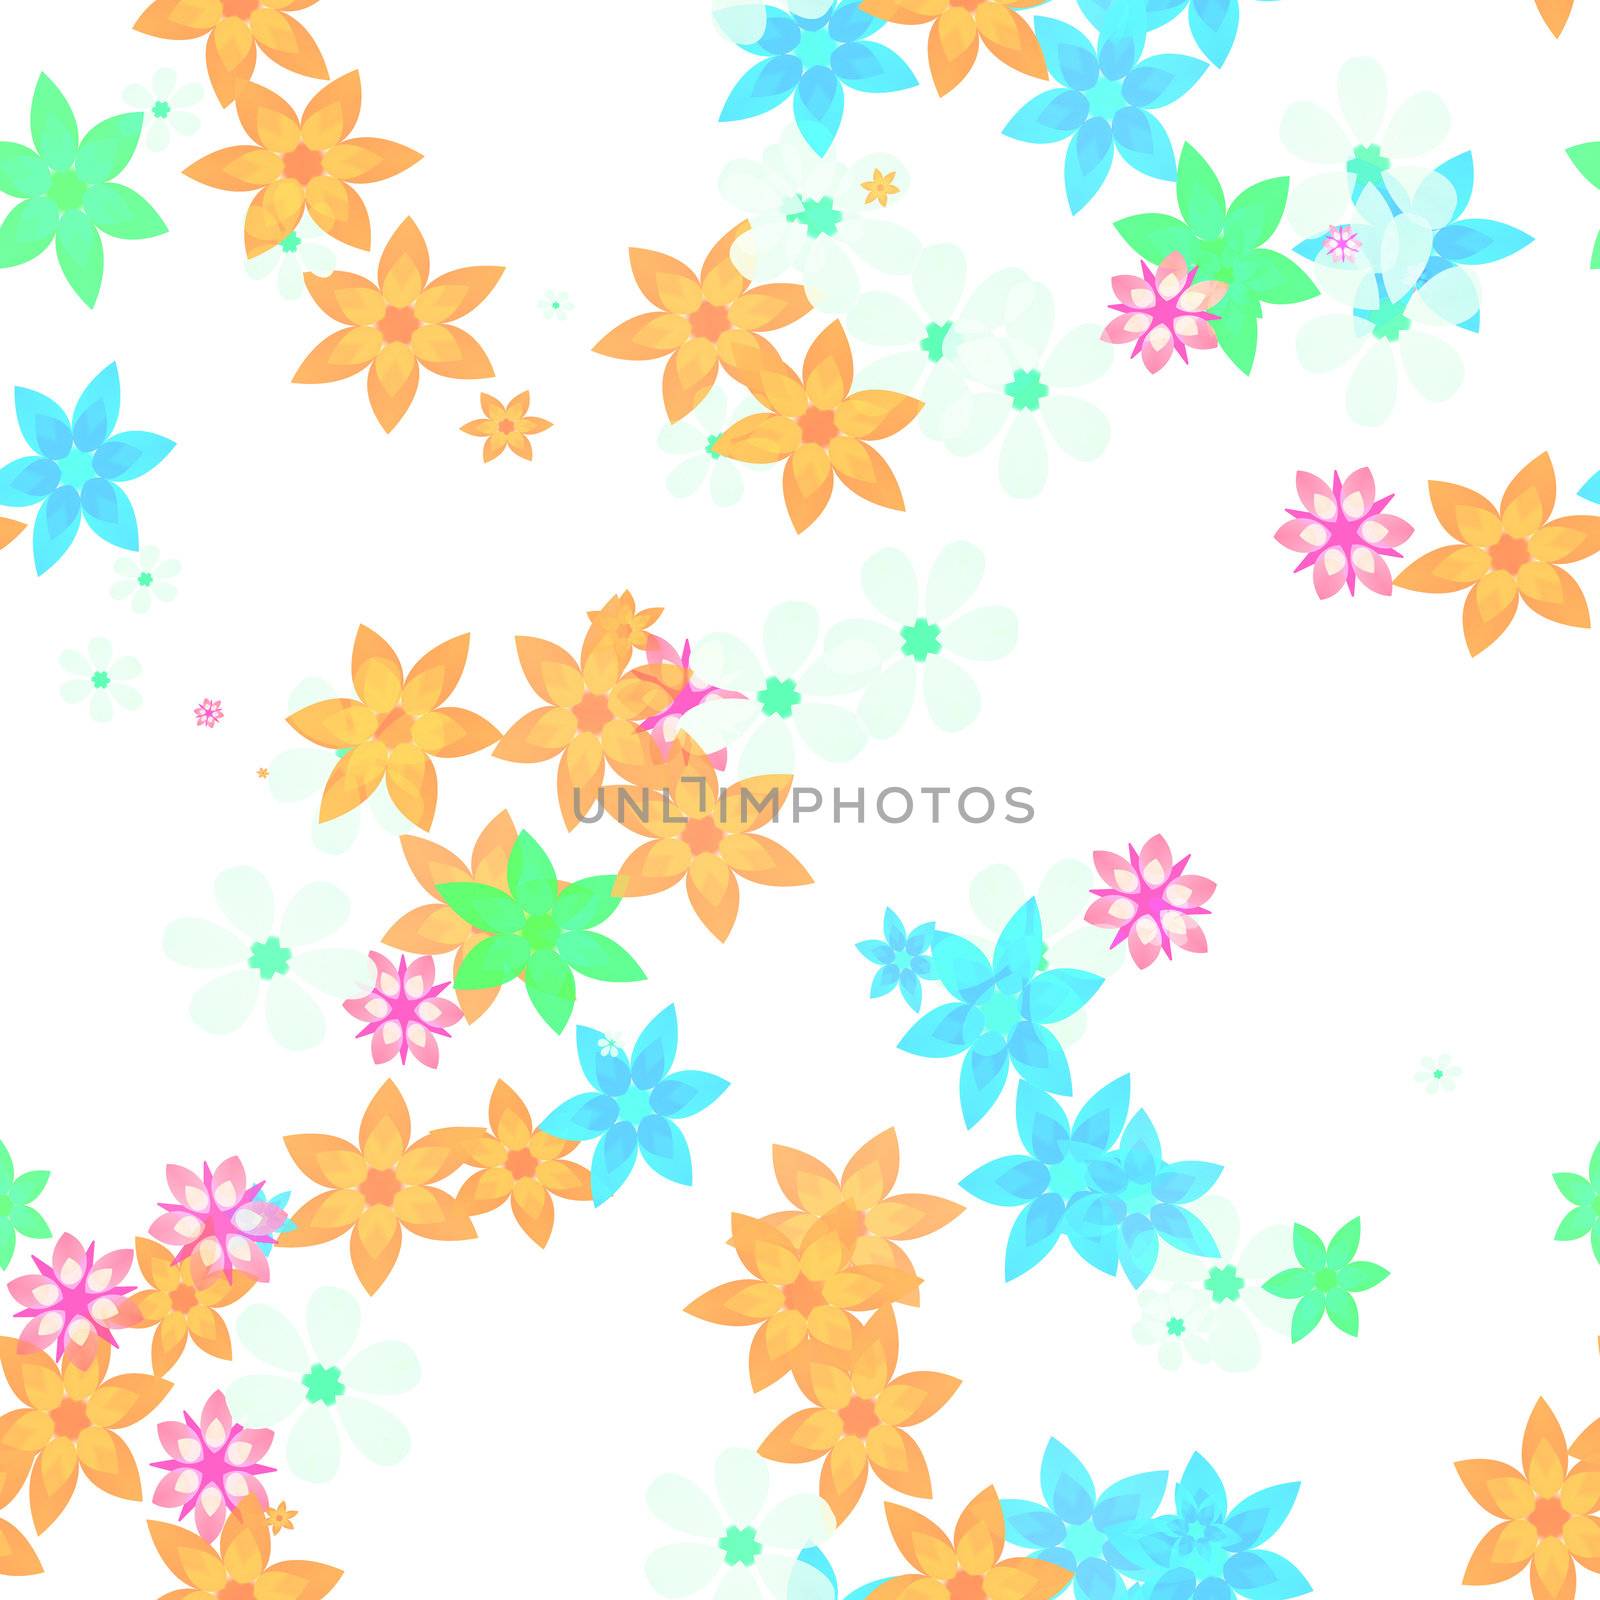 An image of a nice seamless flower background